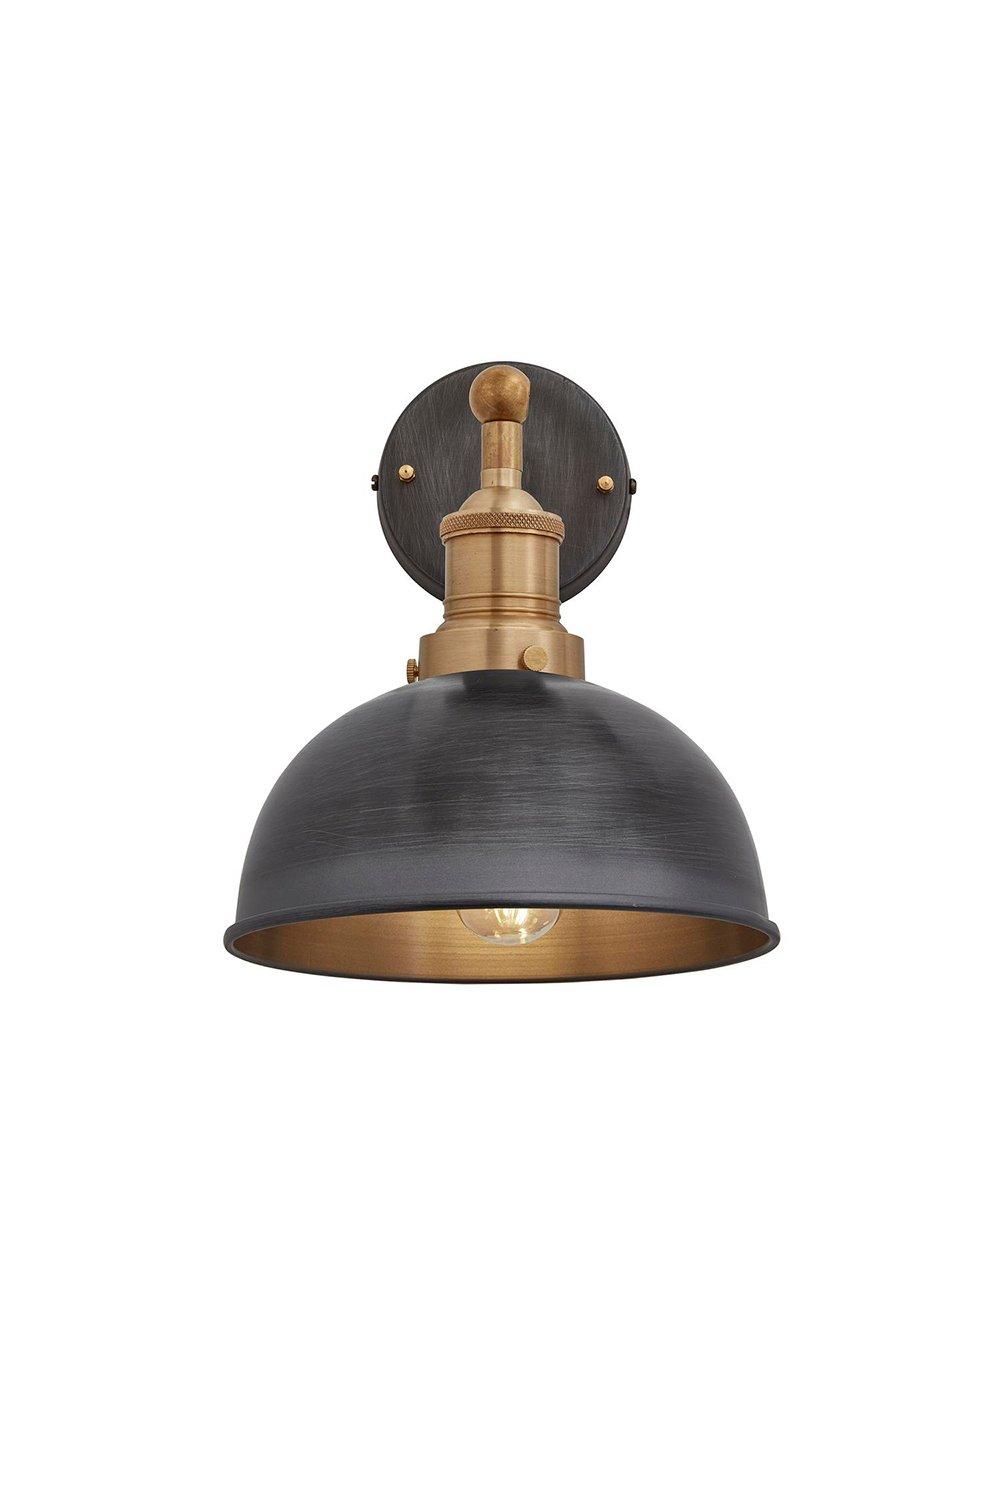 Brooklyn Dome Wall Light, 8 Inch, Pewter, Brass Holder